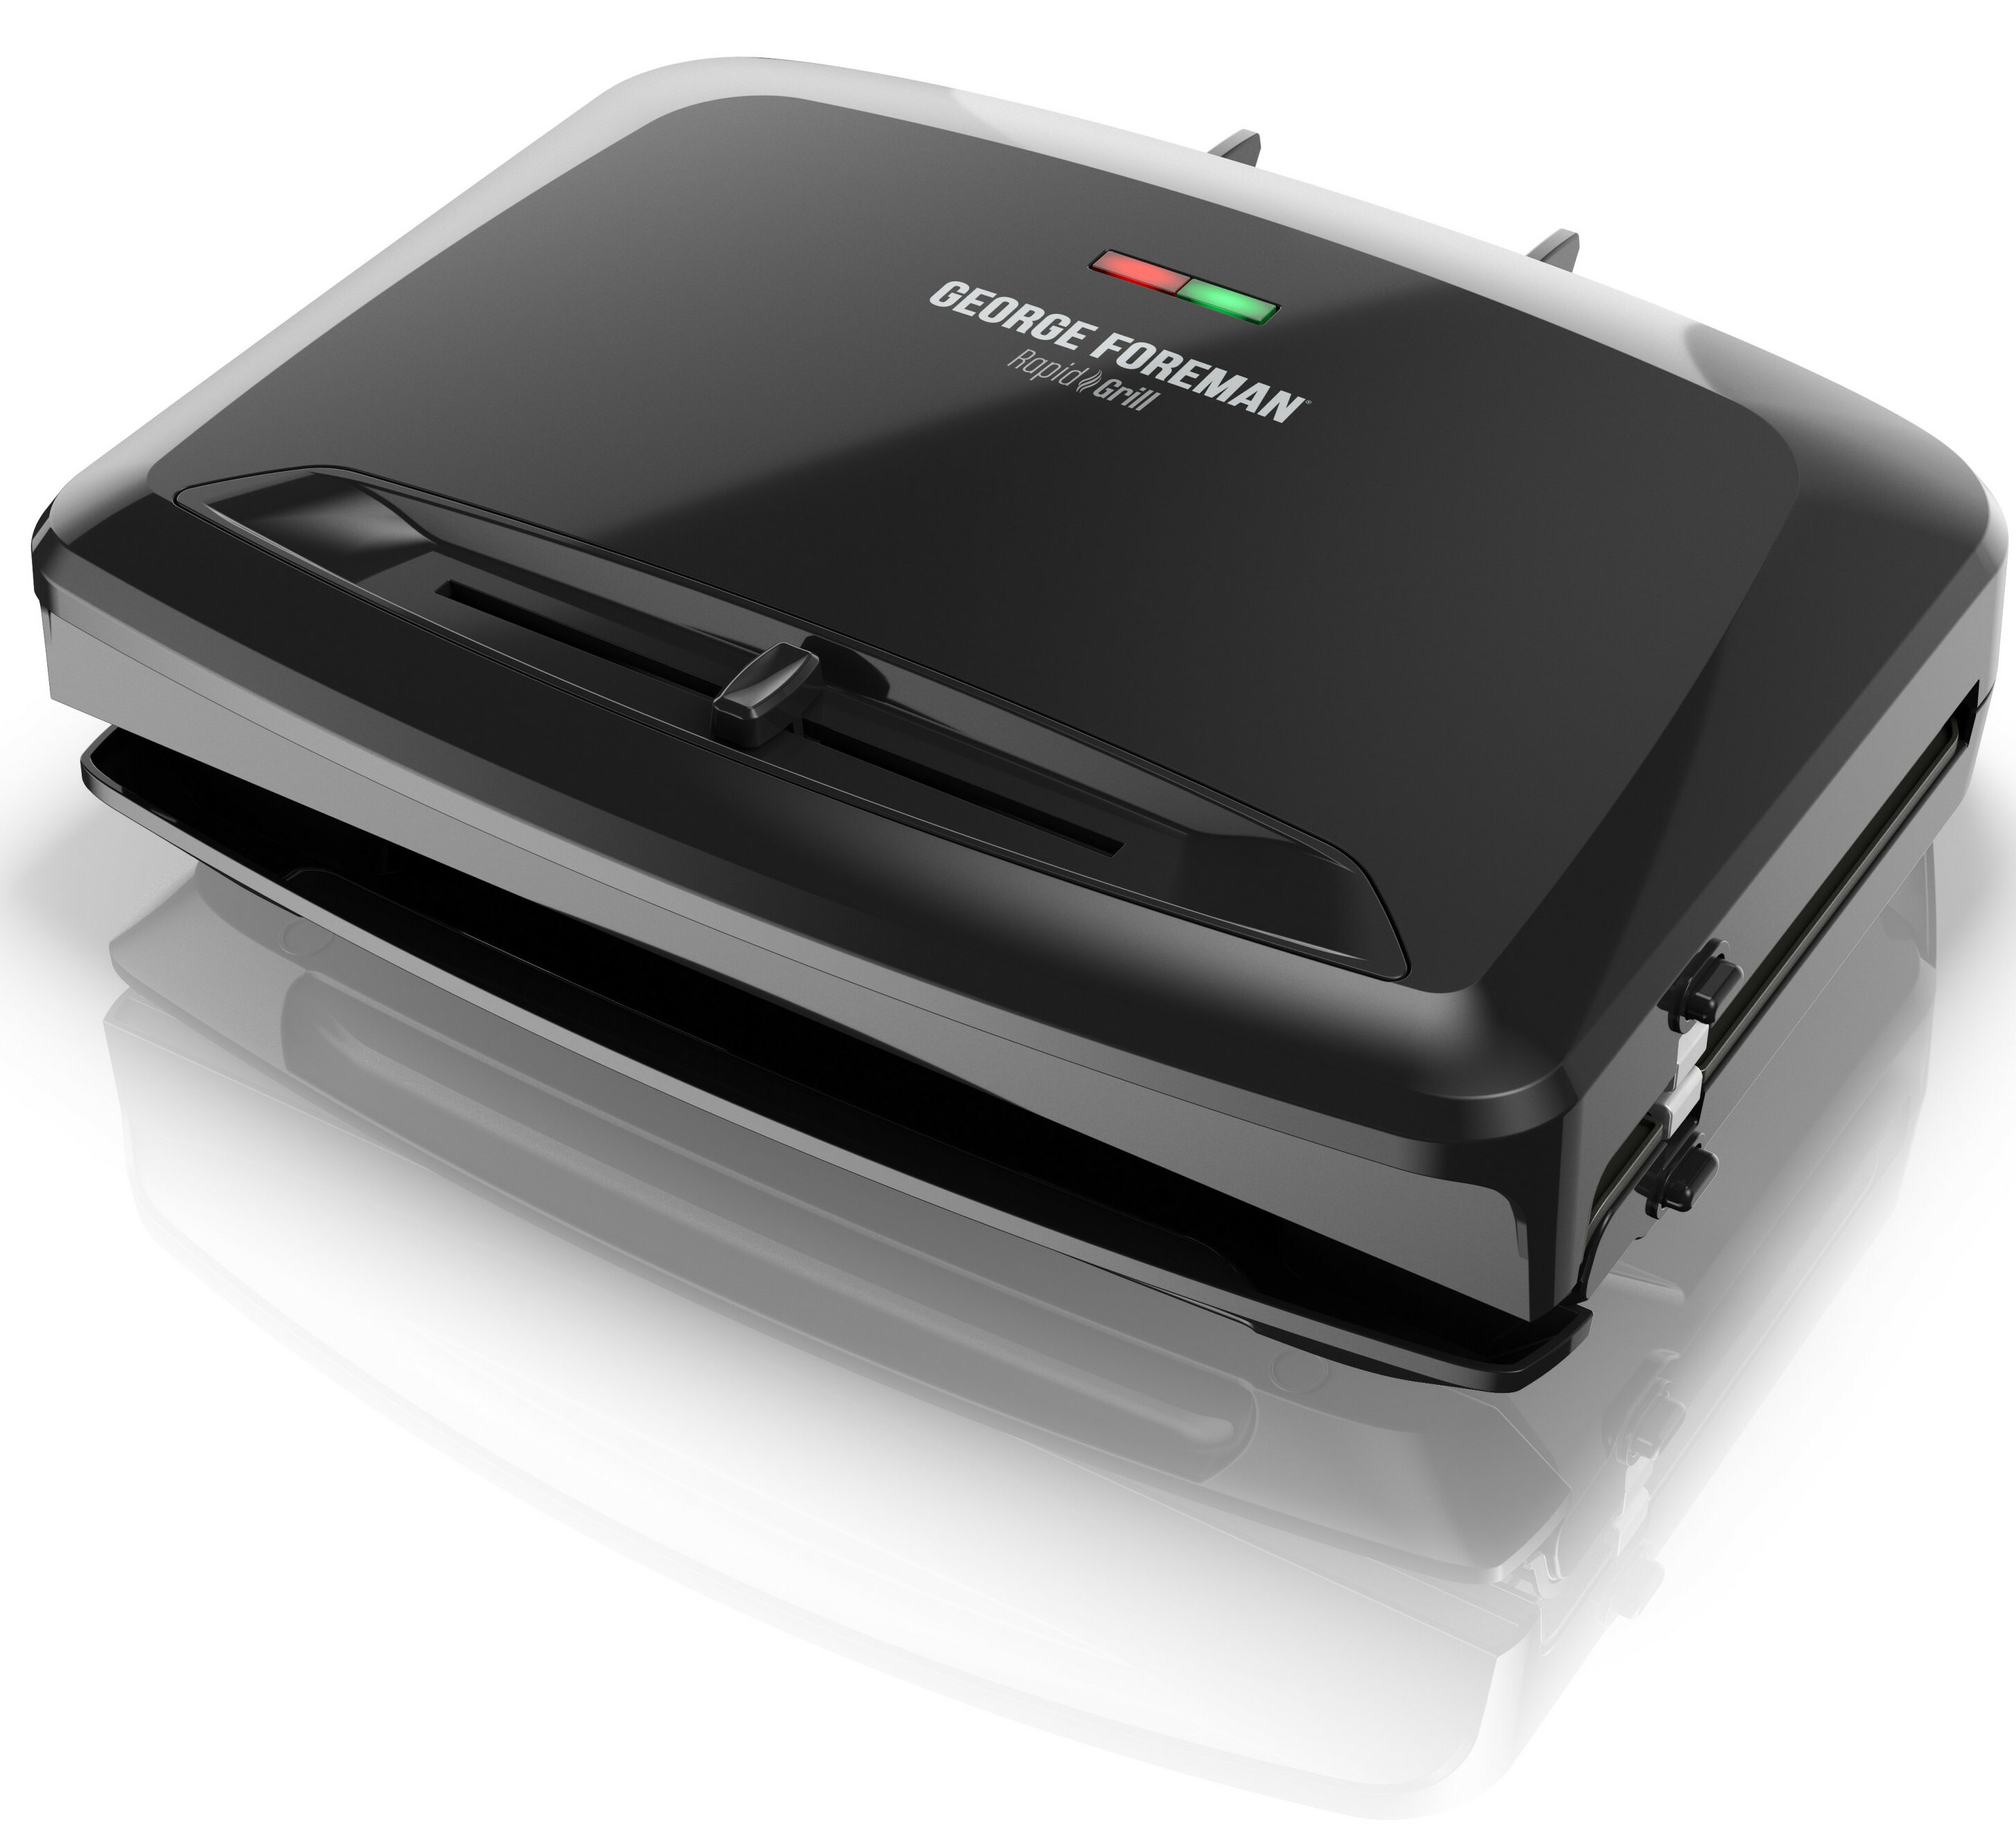  George Foreman 5 serving Panini Grill: Home & Kitchen